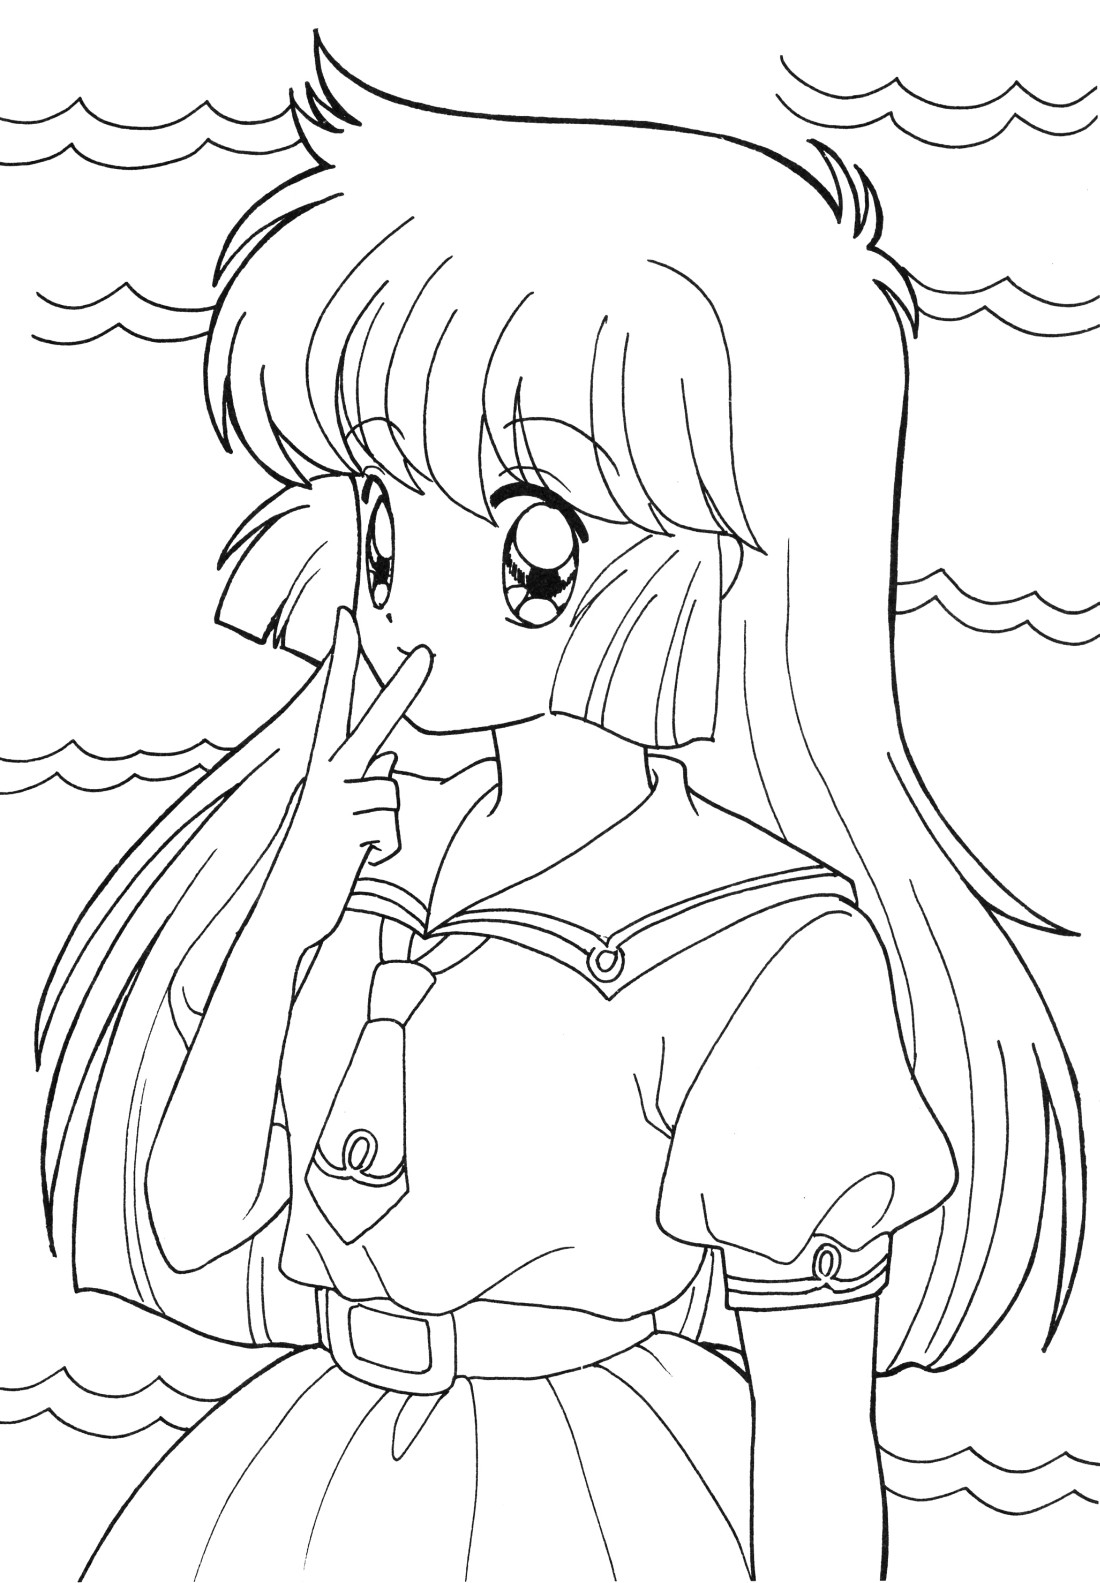 Anime Girl Coloring Sheet
 Anime Coloring Pages Best Coloring Pages For Kids